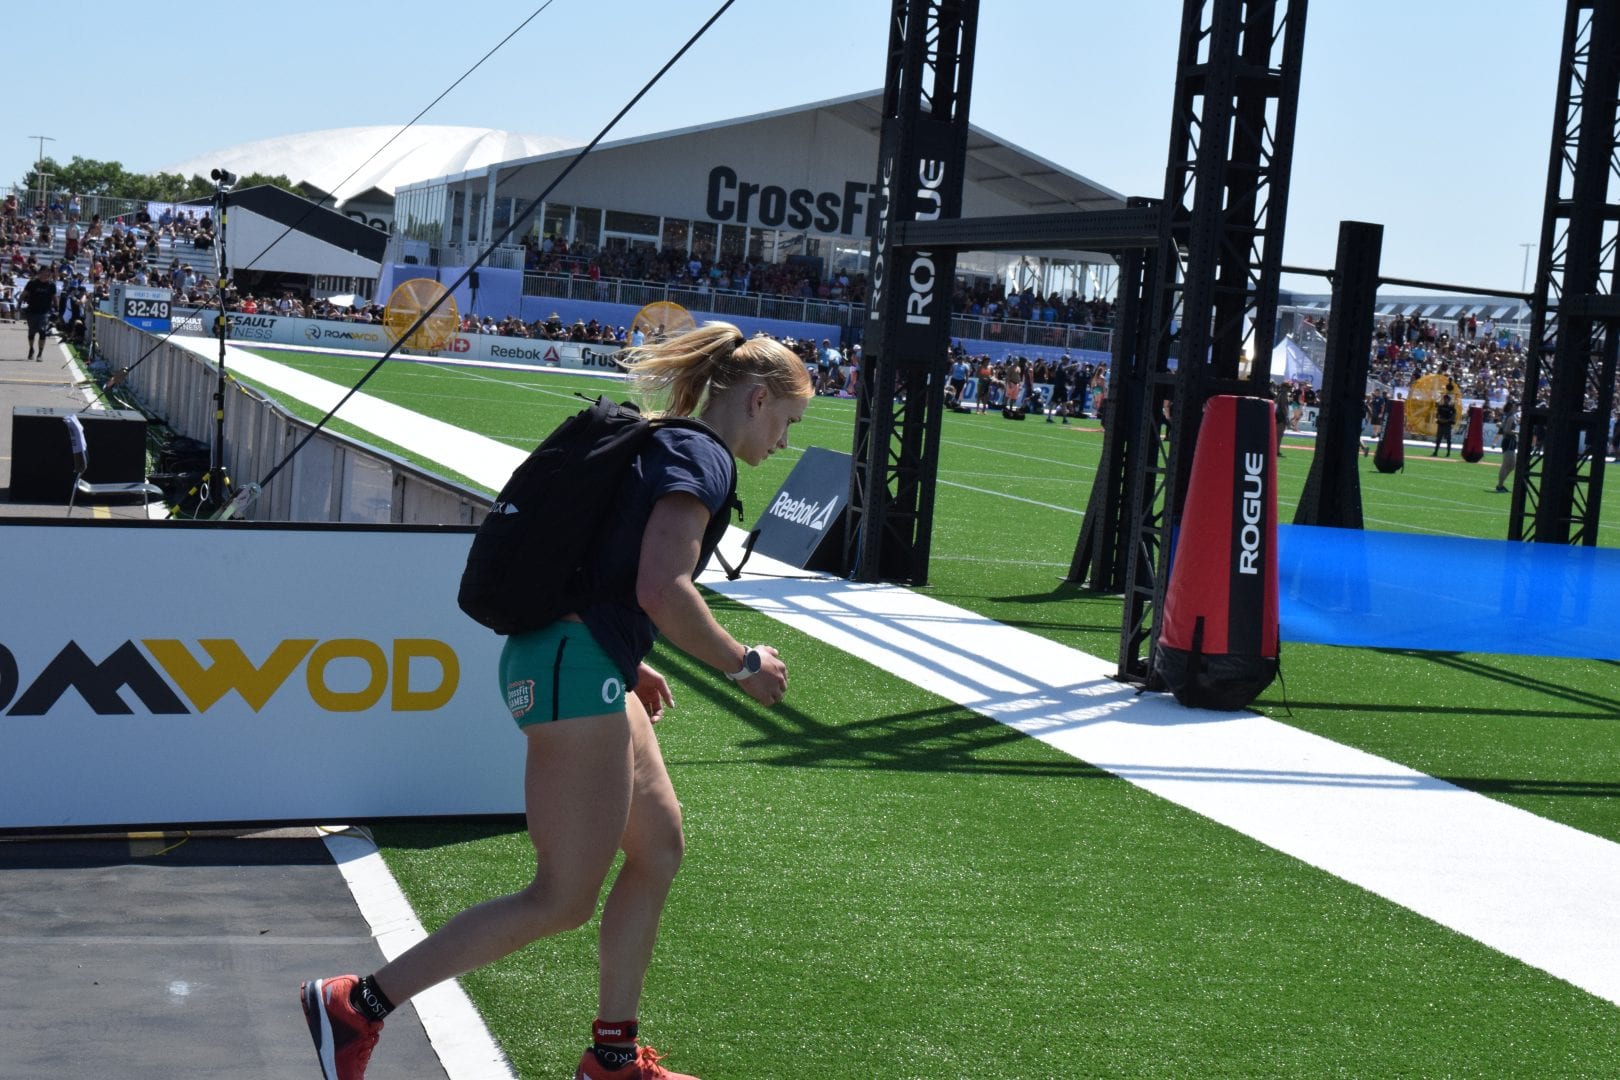 Annie Thorisdottir approaches the finish line of the Ruck Run event at the 2019 CrossFit Games